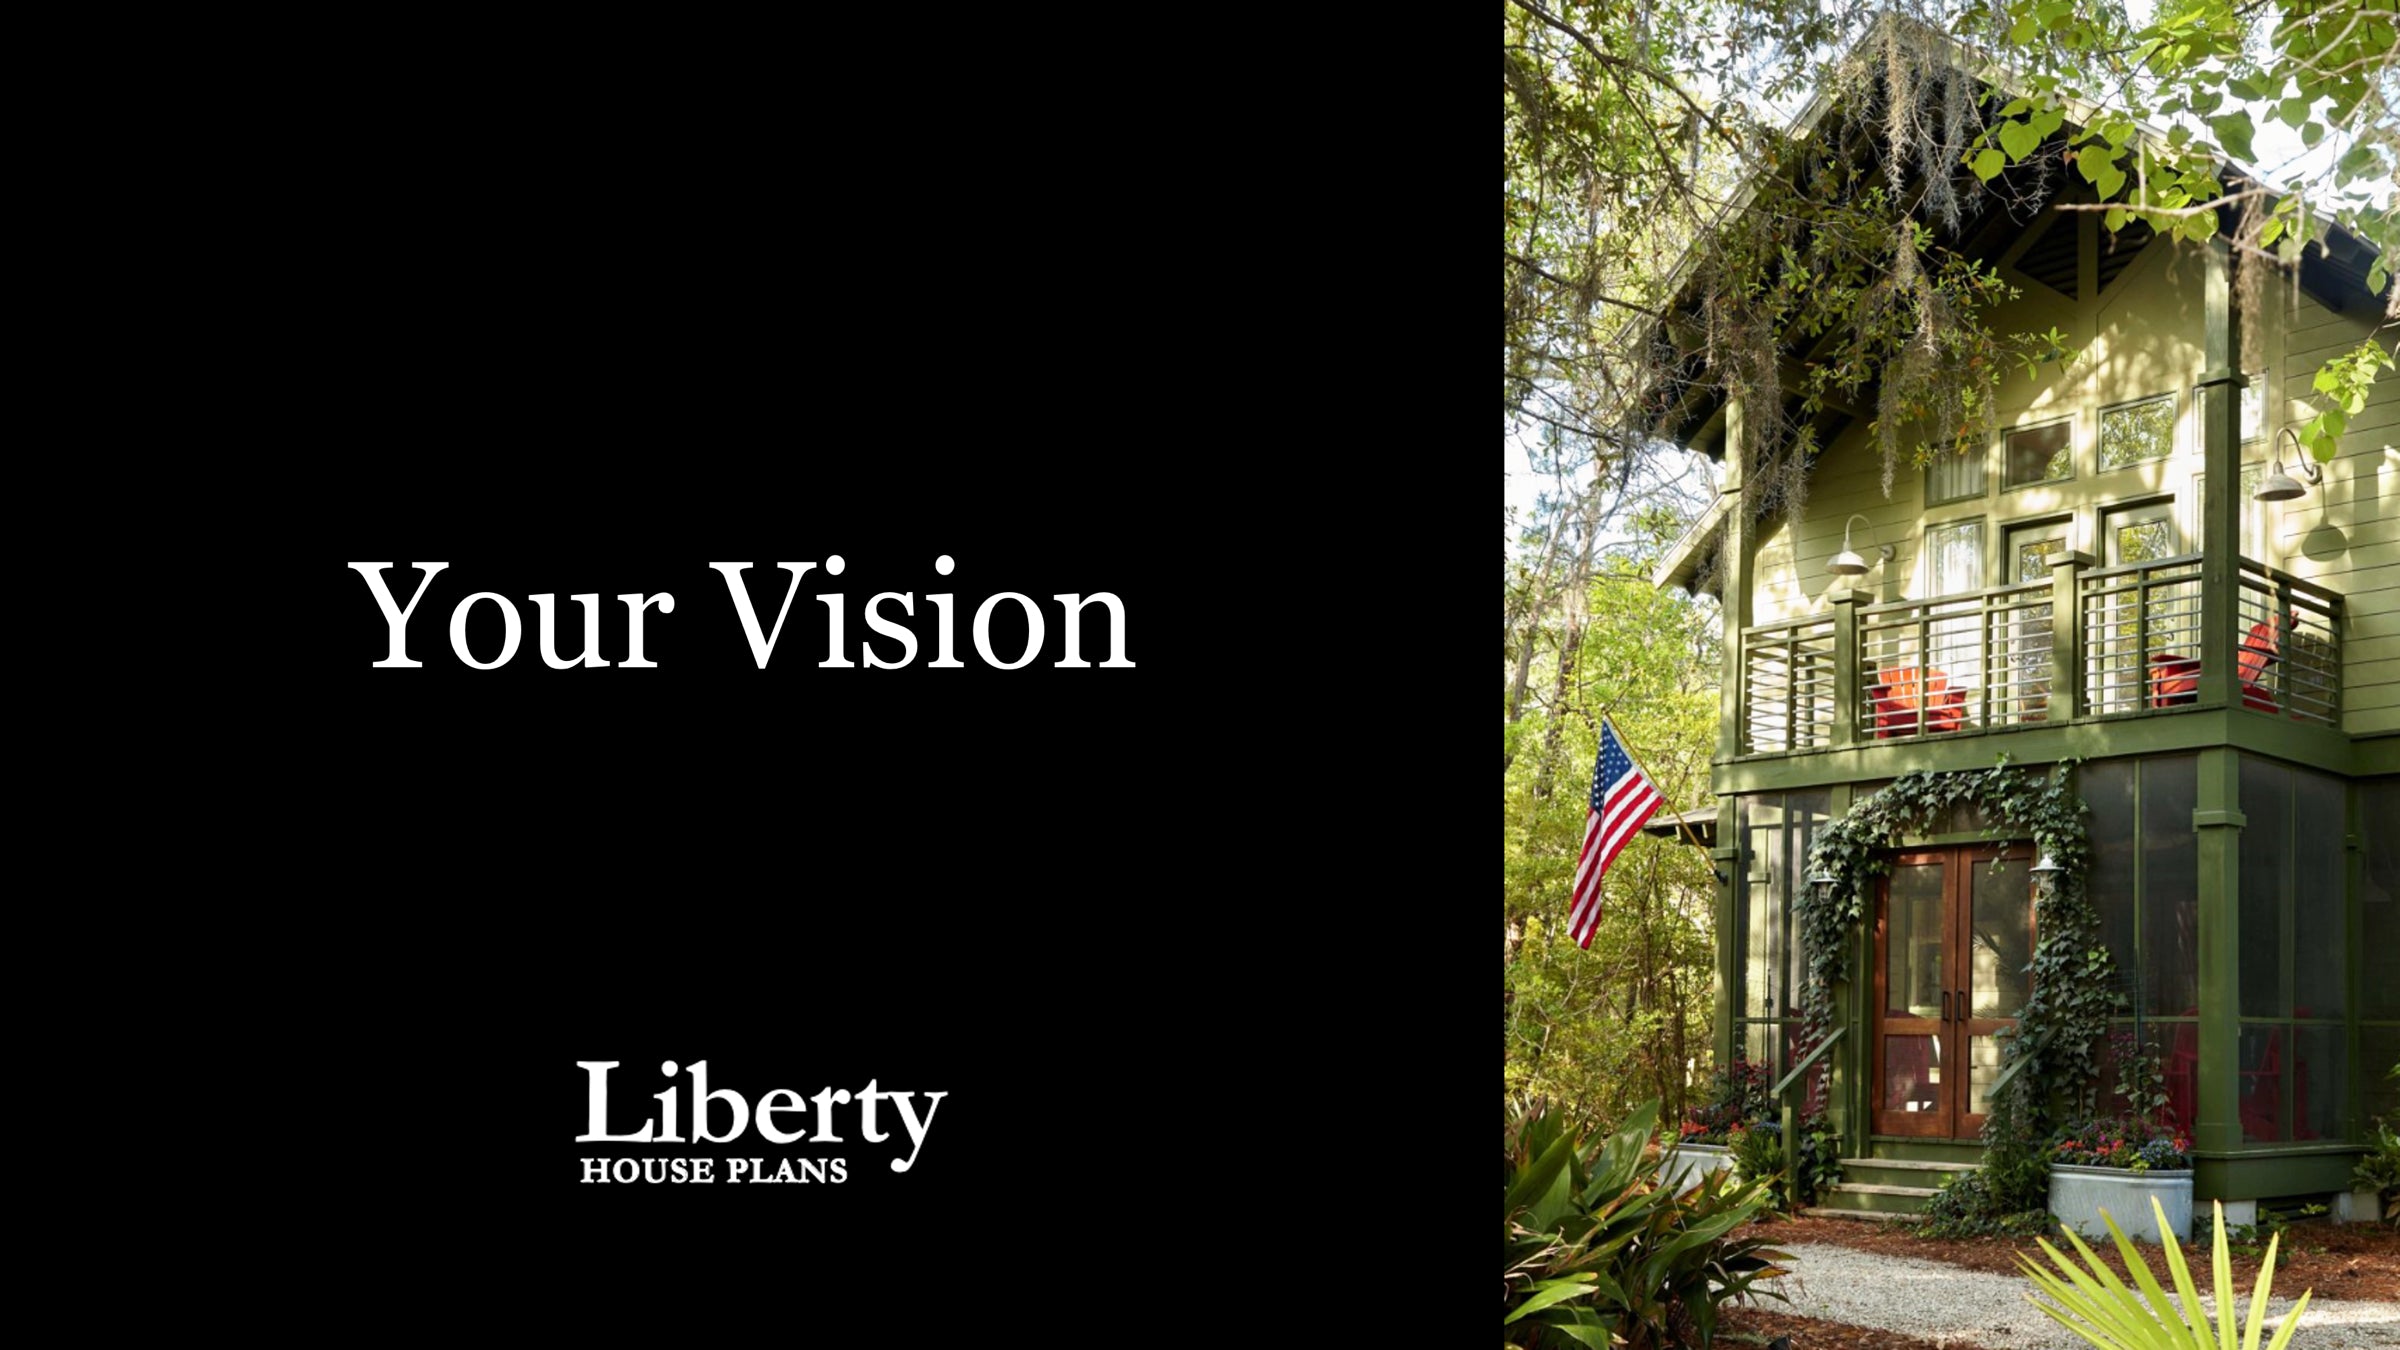 Load video: Liberty House Plans video, &quot;Your Vision,&quot; displays photos of beautiful homes, alternating with text: Your vision is beautiful. Lovable. Timeless. We help you make it real.